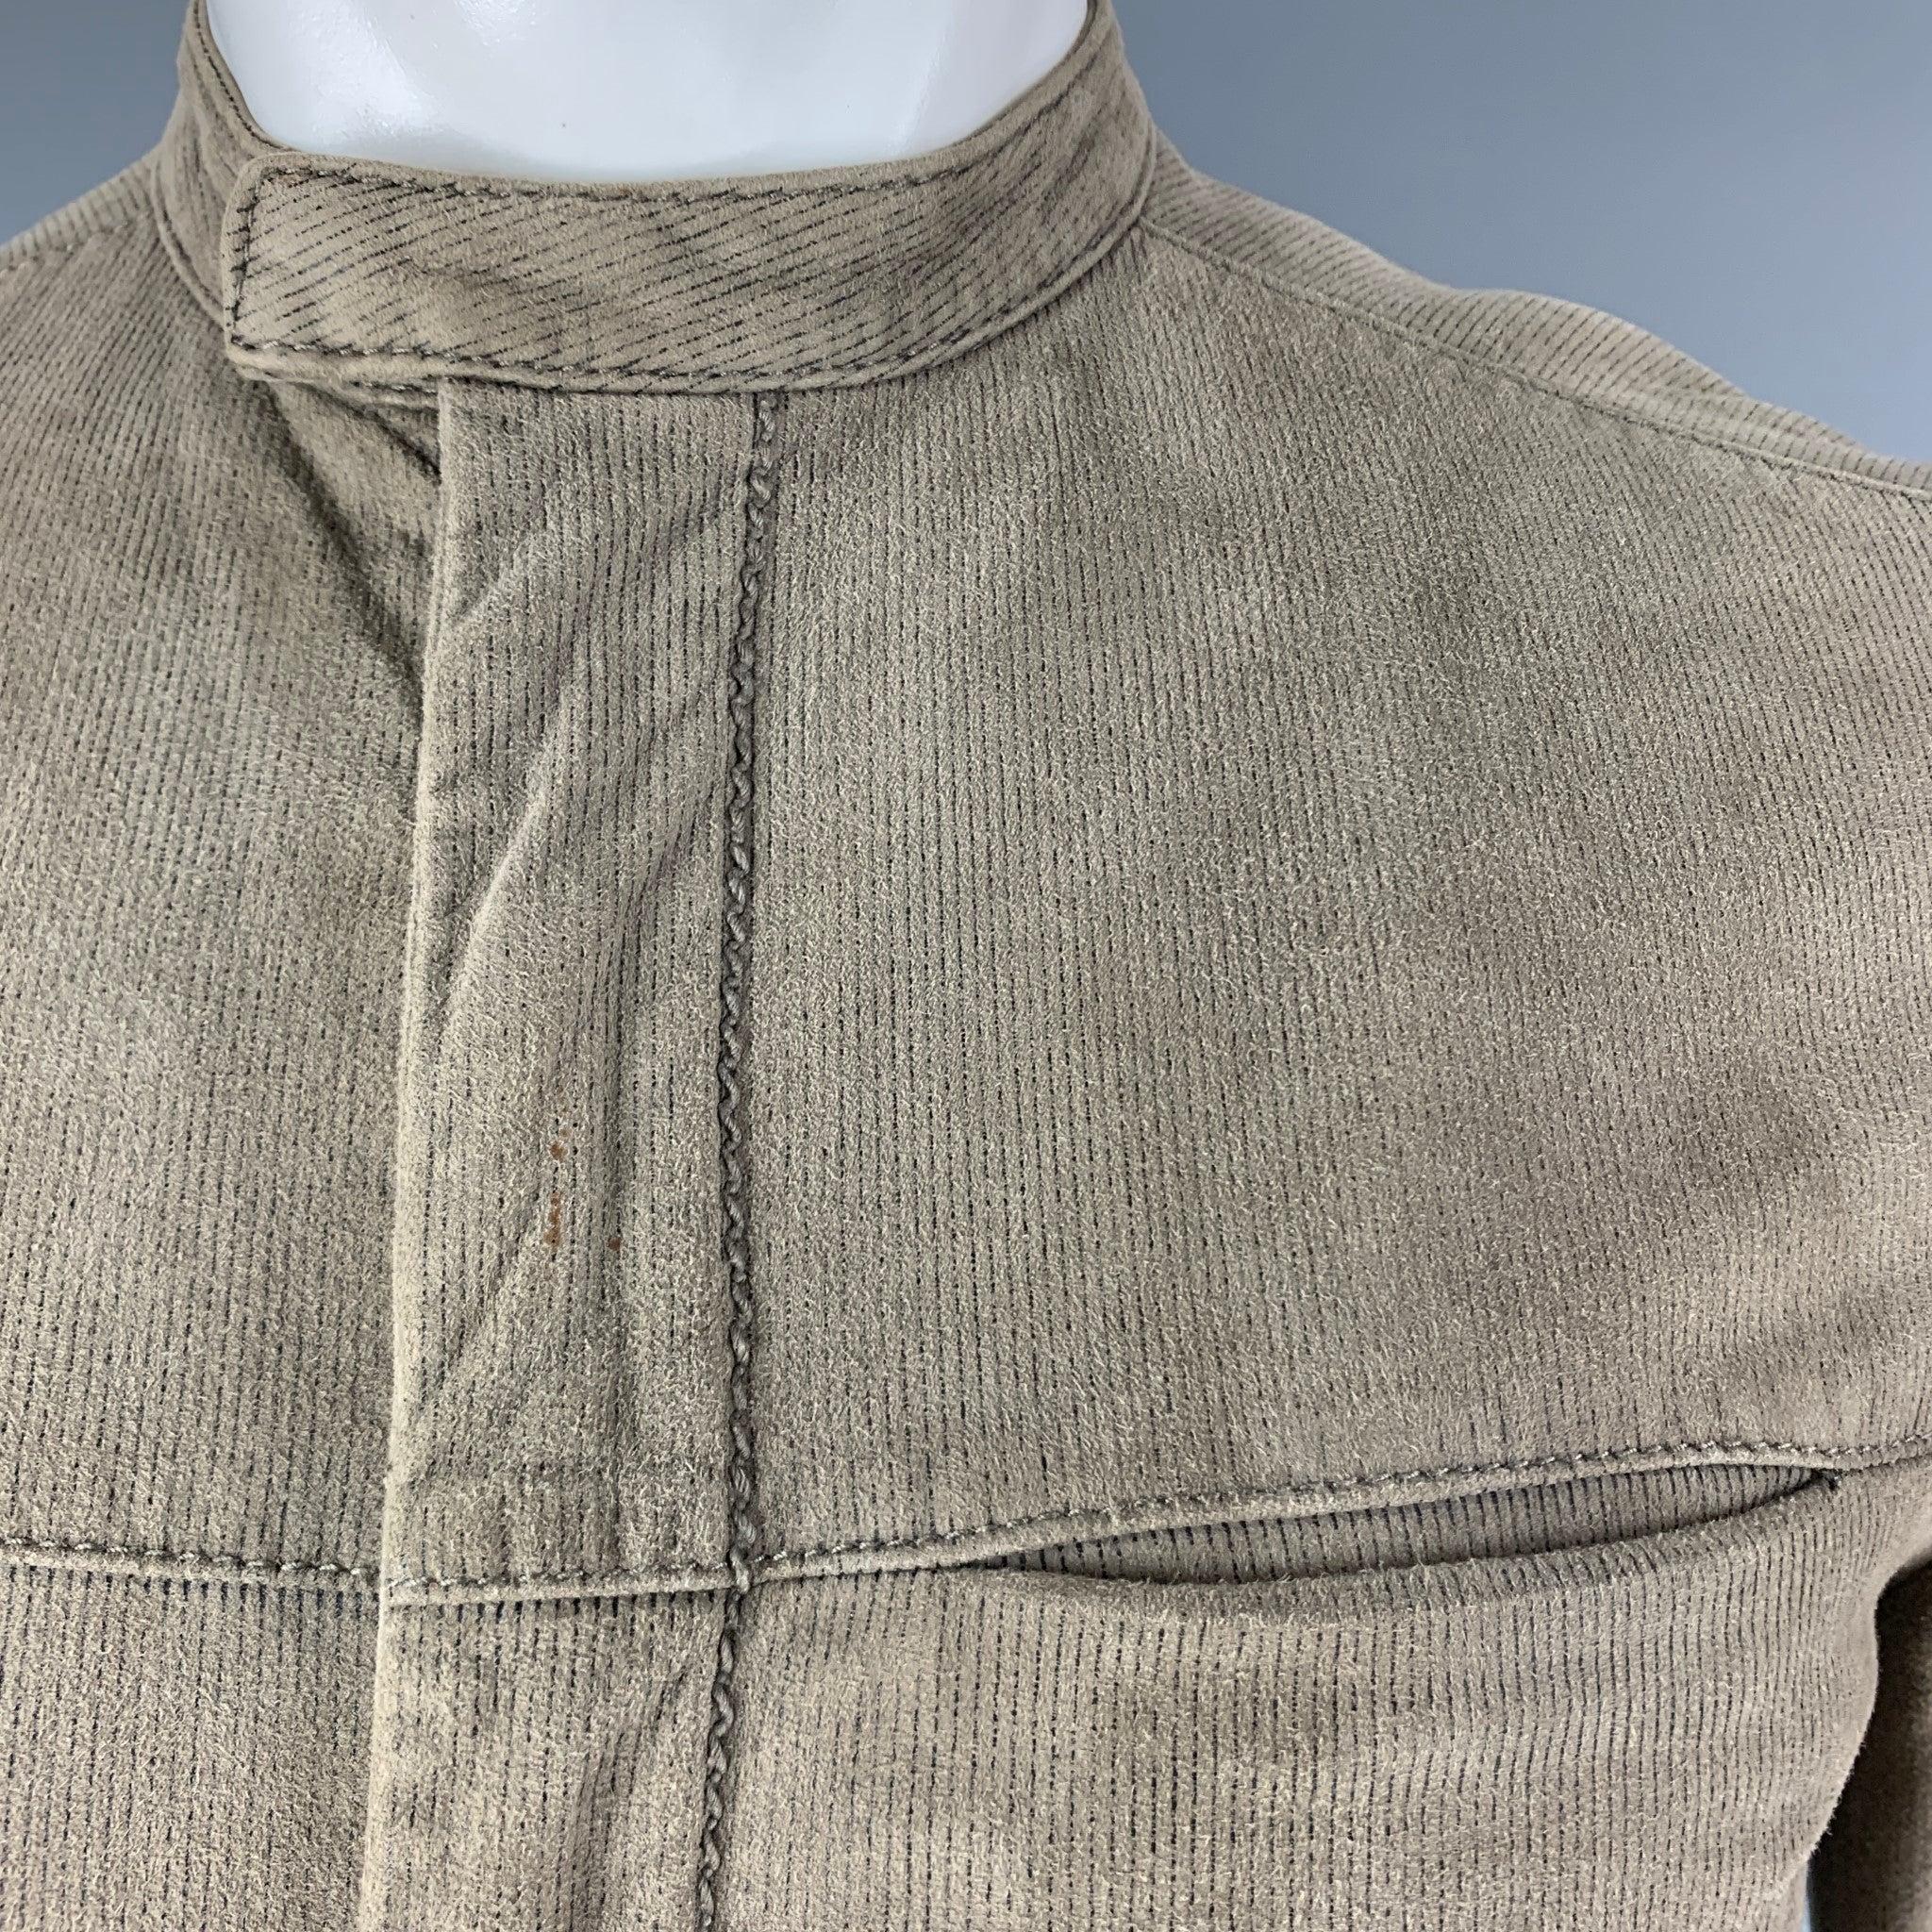 JOHN VARVATOS olive green zip up jacket comes in 100% goat suede featuring a mandarin collar, pinstripes, and welt pockets. Very Good Pre-Owned Condition. 

Marked:   44 

Measurements: 
 
Shoulder: 16.5 inches Chest: 38 inches Sleeve: 24.5 inches